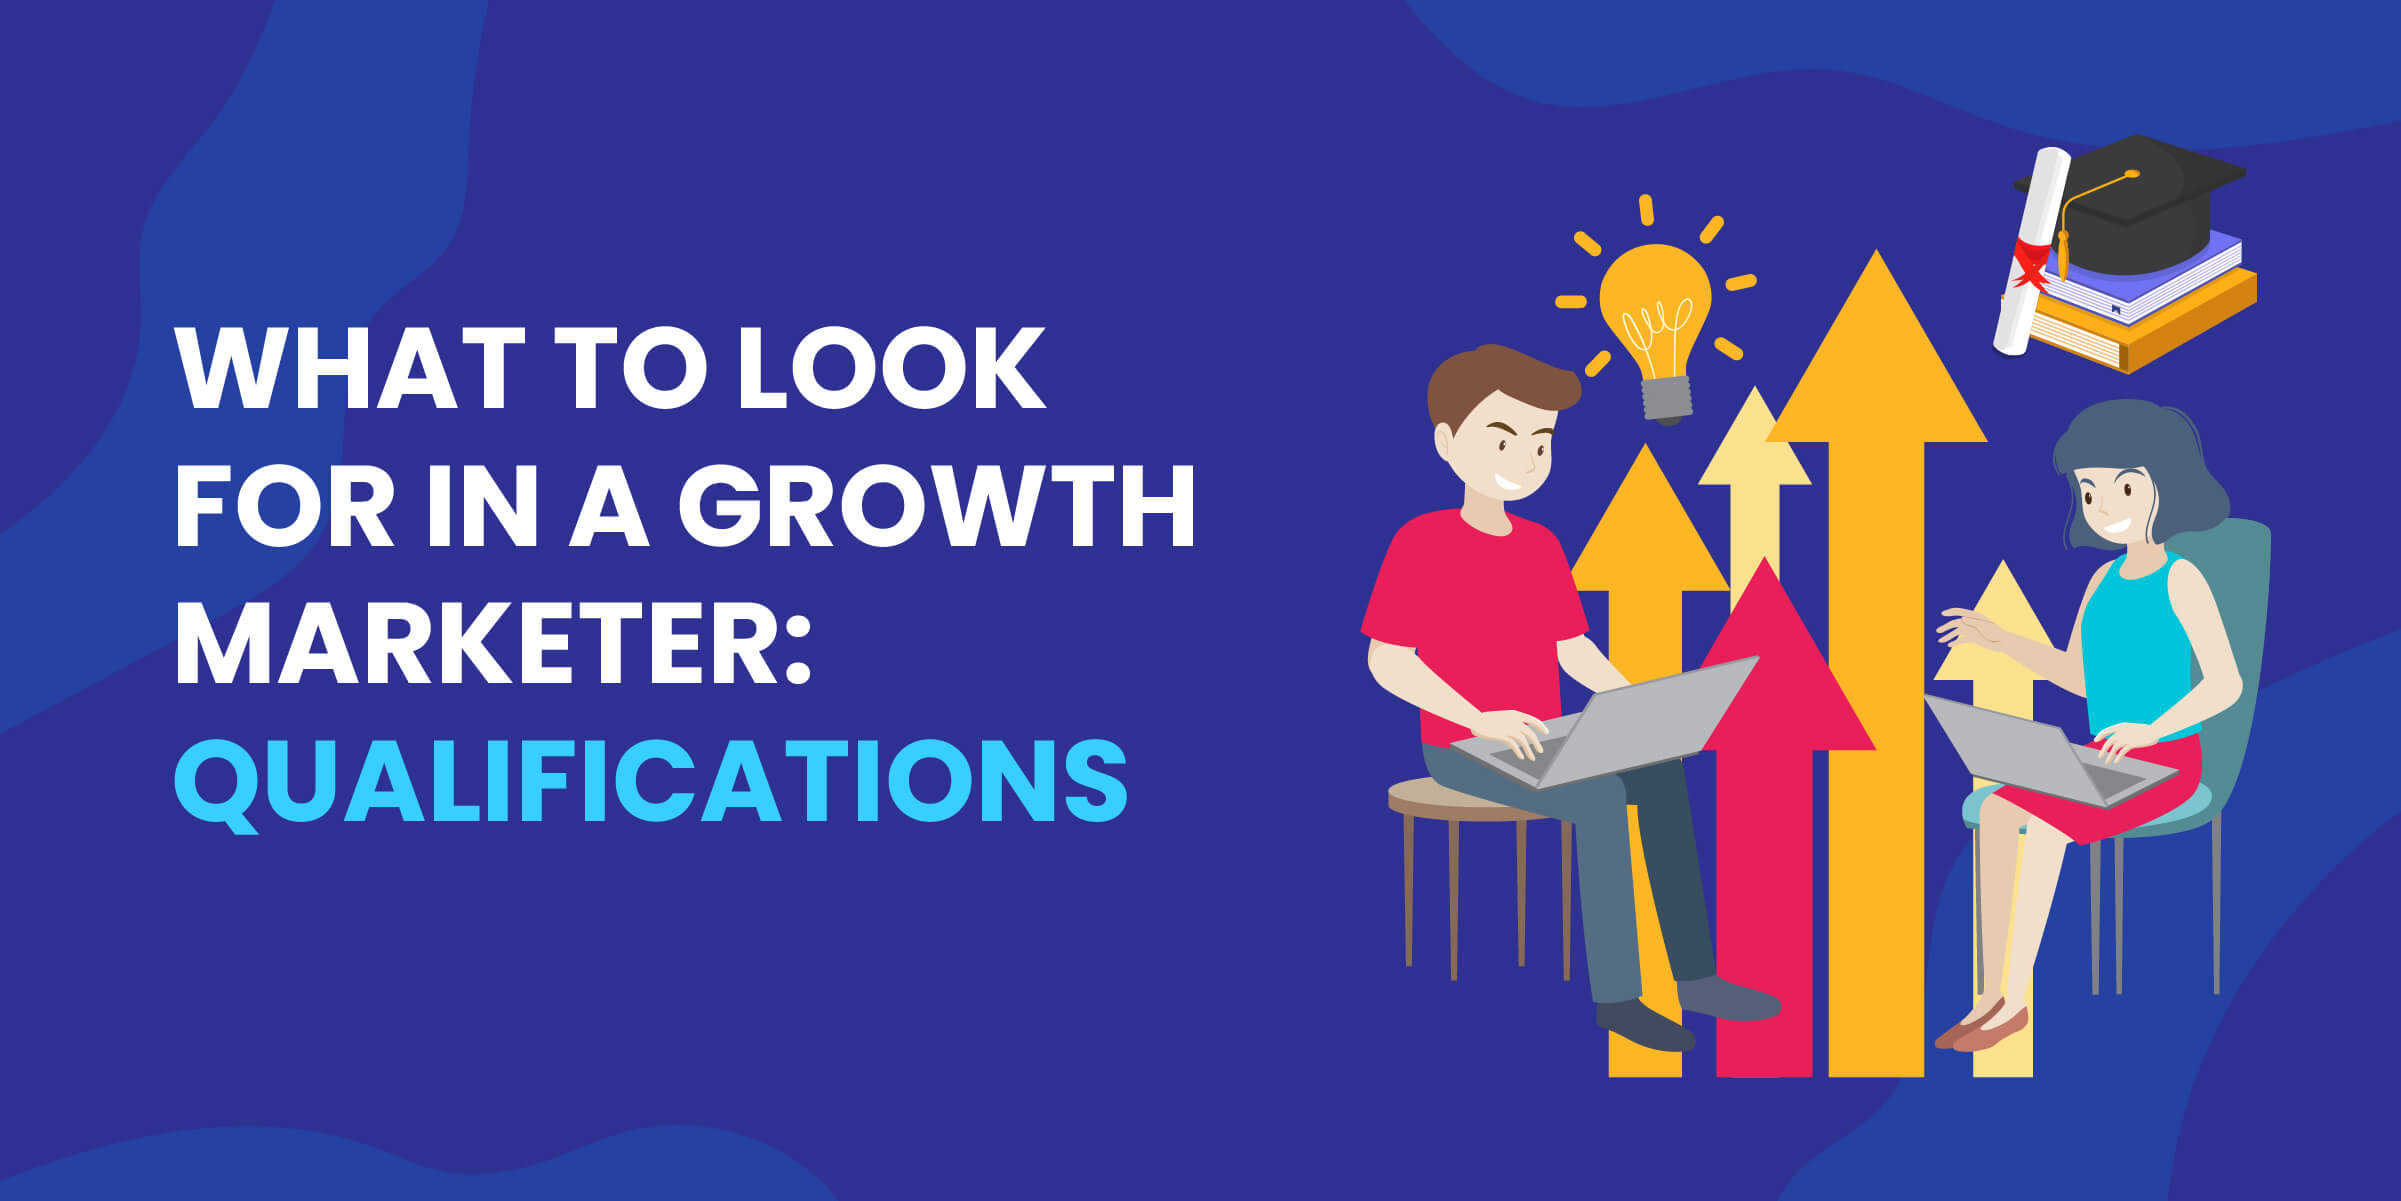 What to Look for in Growth Marketer - Qualifications